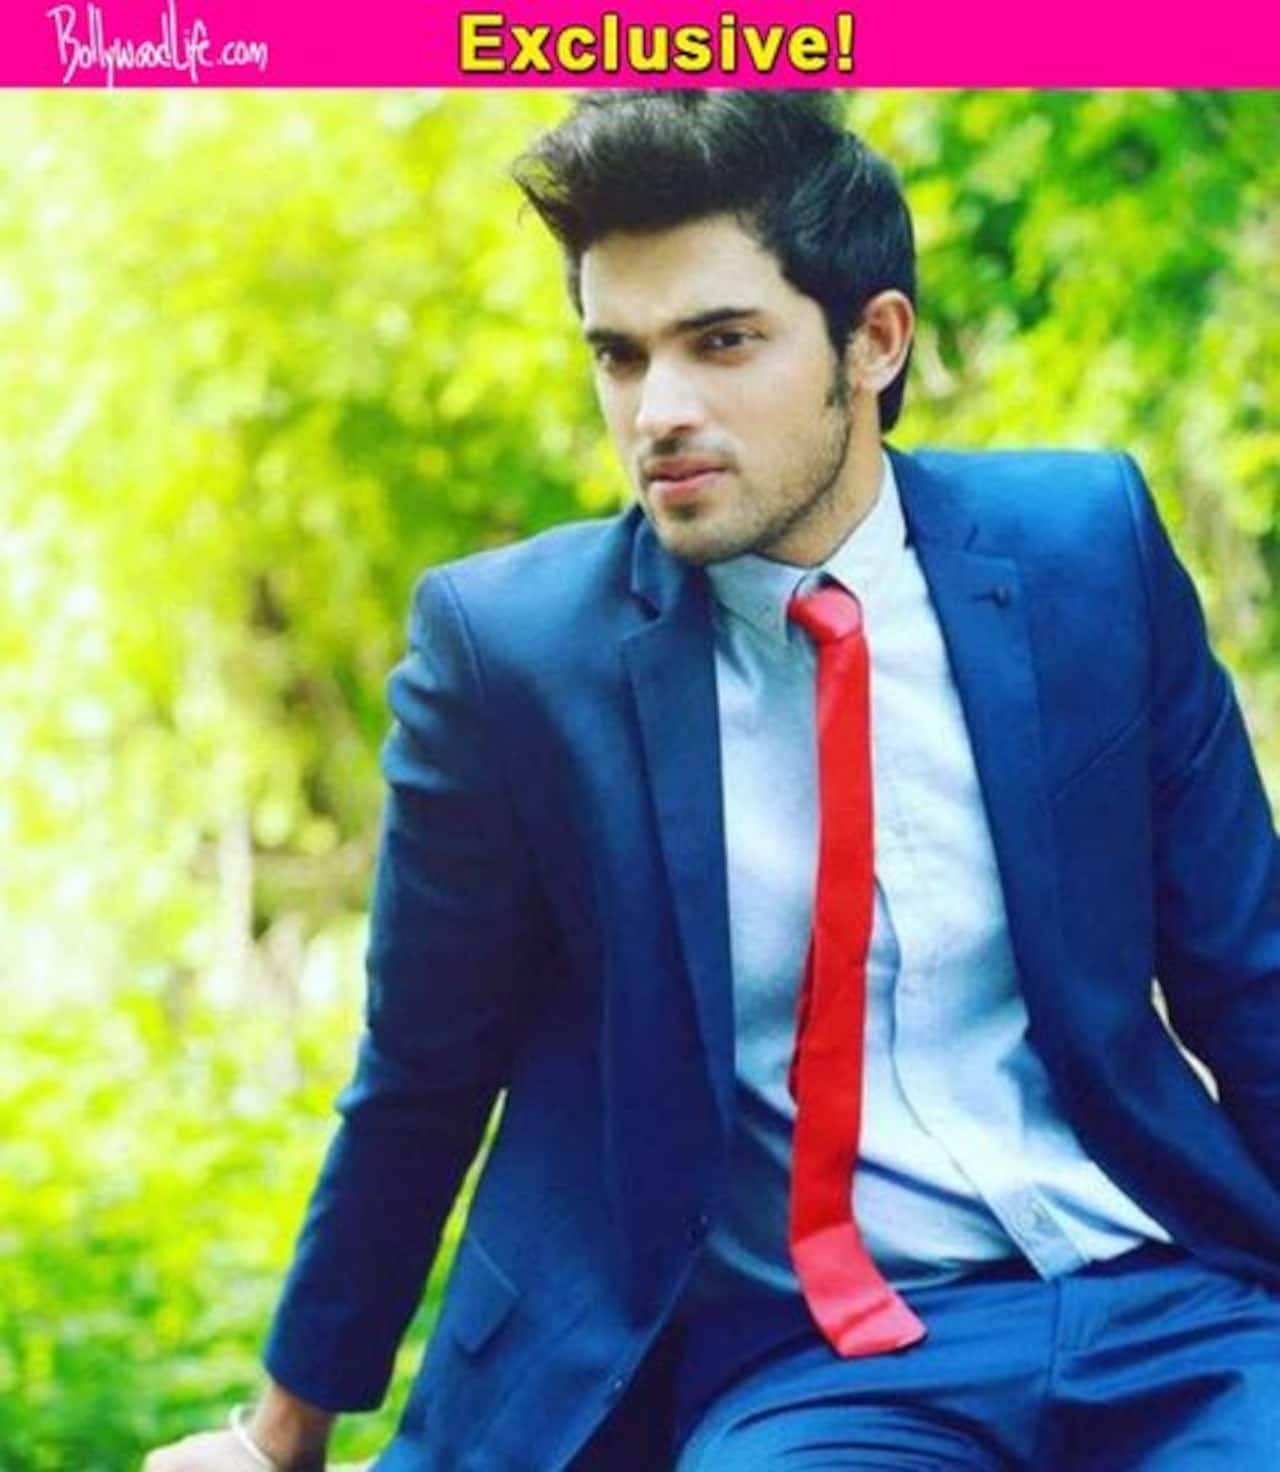 LEAKED! The mystery behind Parth Samthaan's ugly Whatsapp scandal and his controversial past with Vikas Gupta!